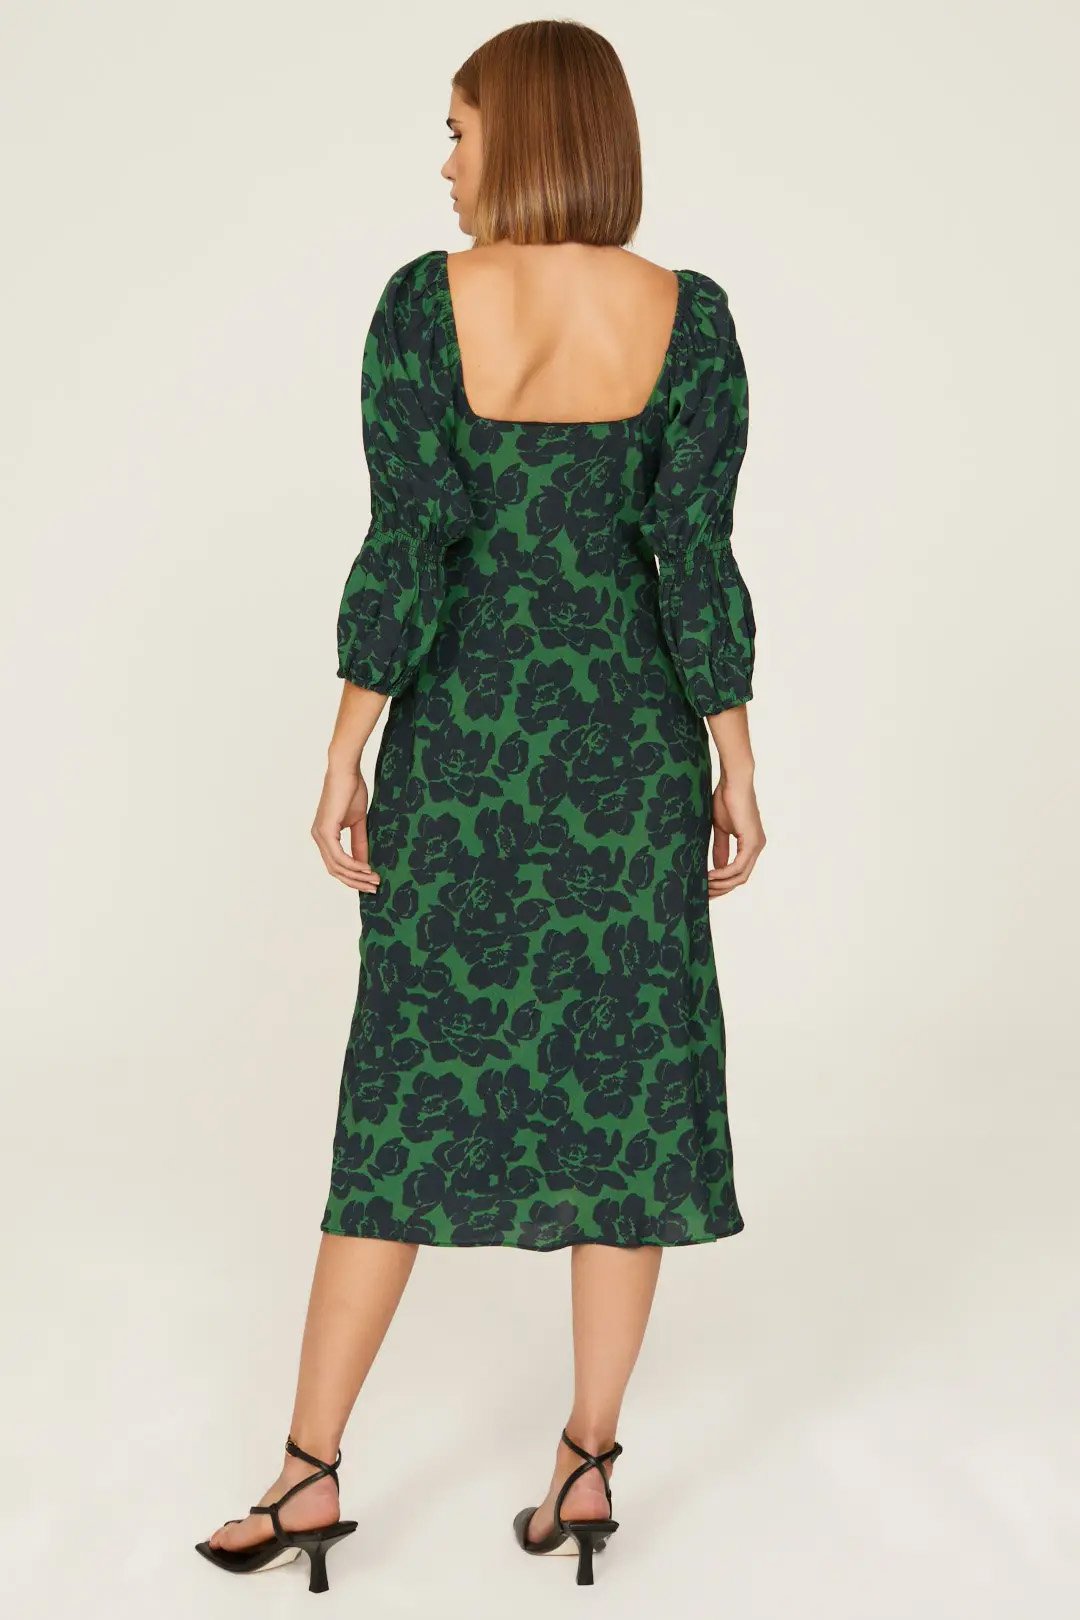 floral scoop dress peter som fall rent fashion